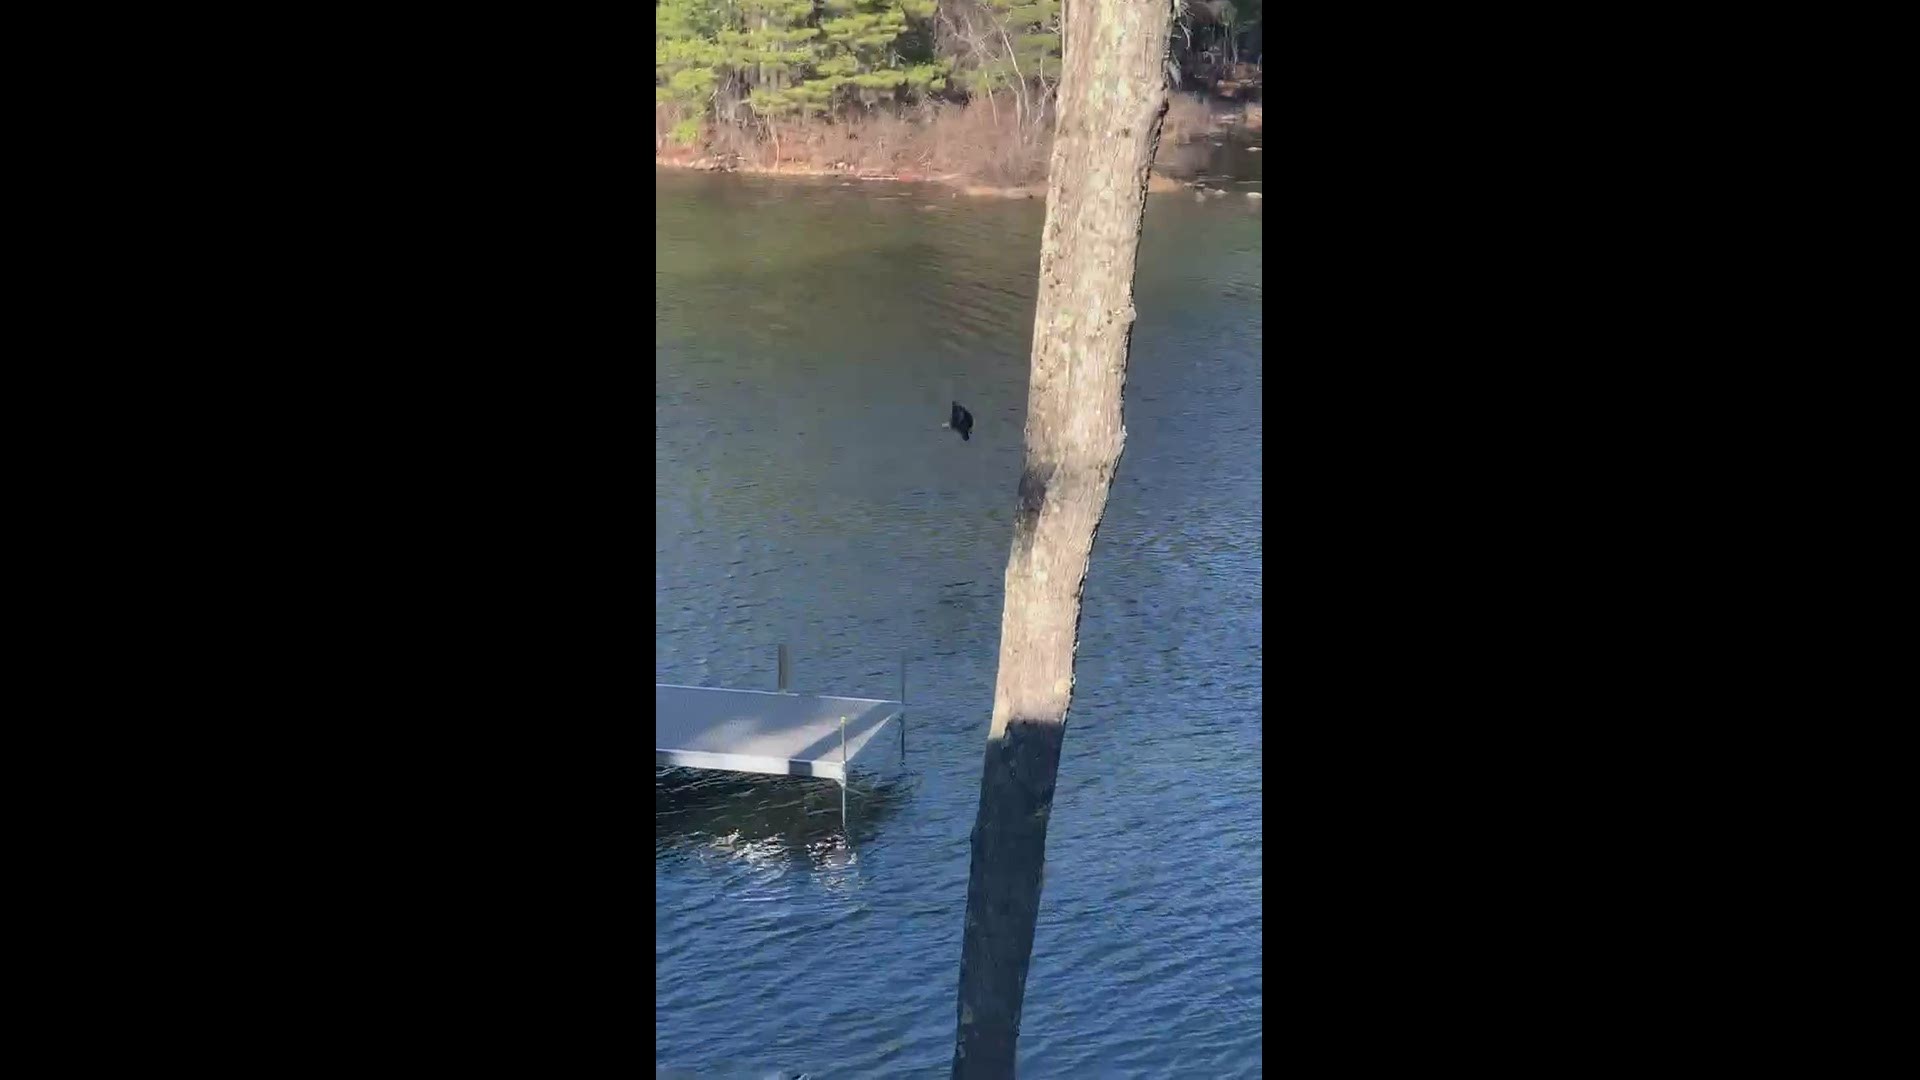 mother eagle hovering over the water, baby eagle fell in while flying.
Credit: Makayla Cooper